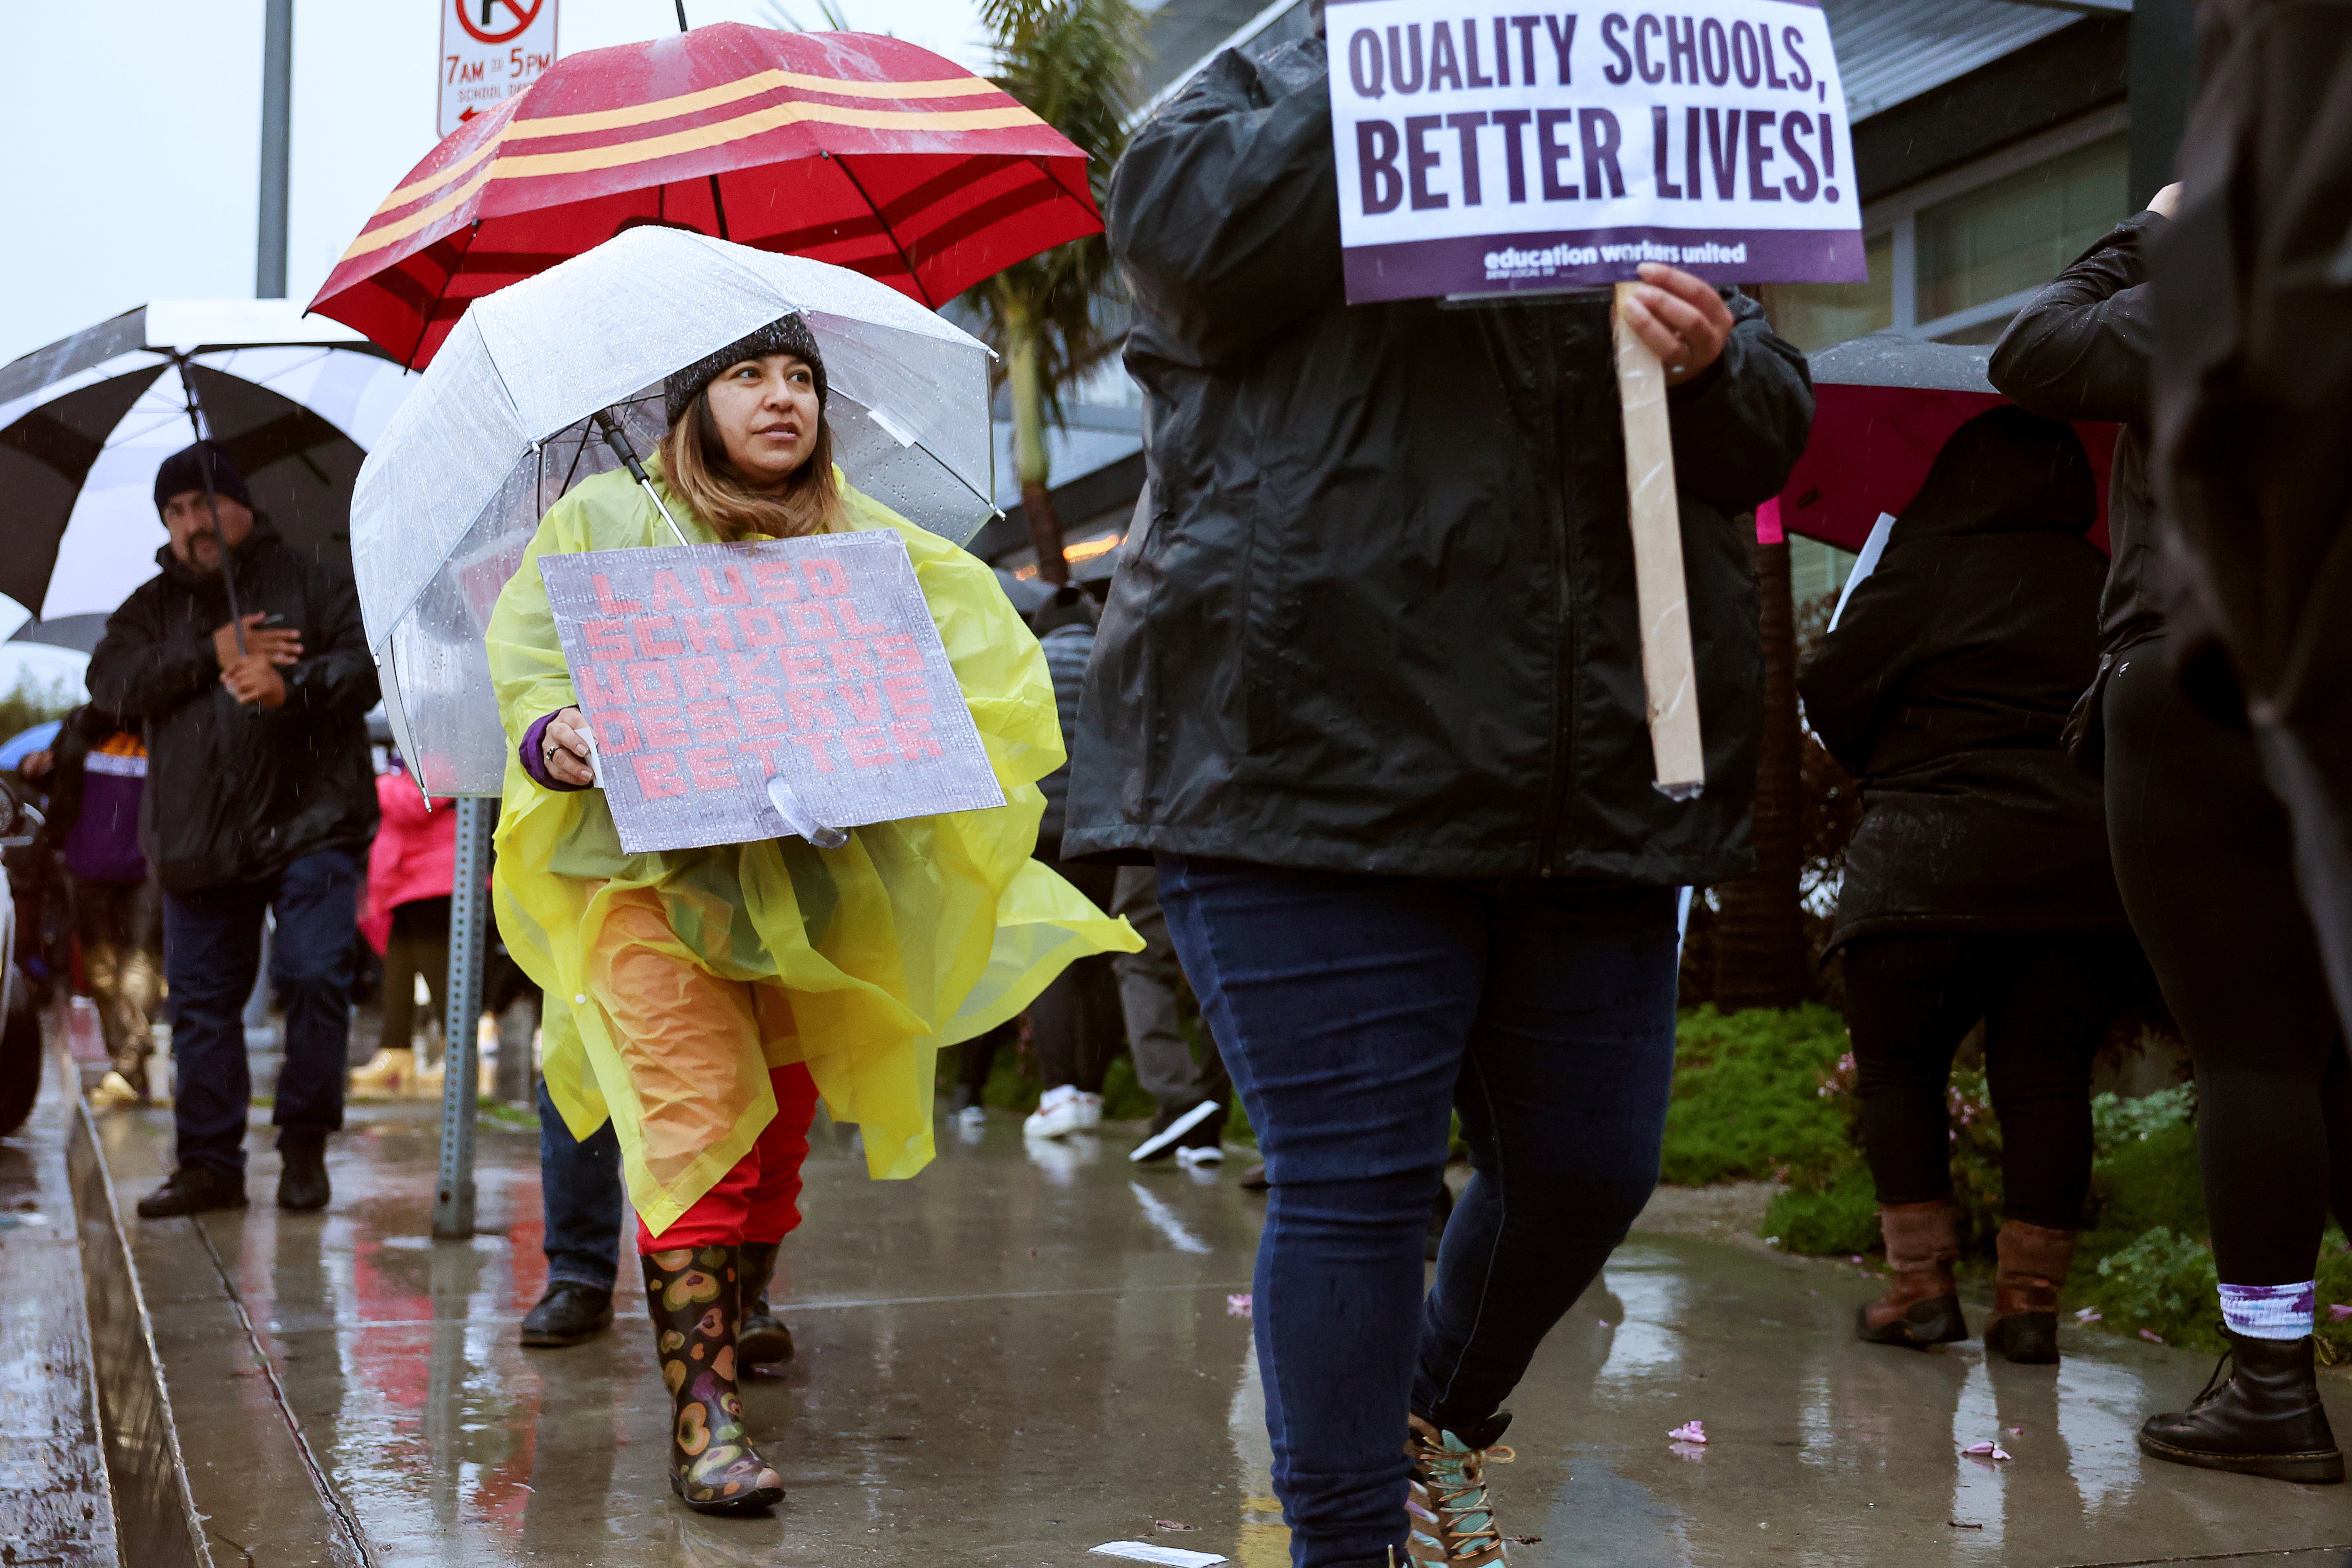 People in rain coats hold signs and umbrellas while walking outside during a strike.